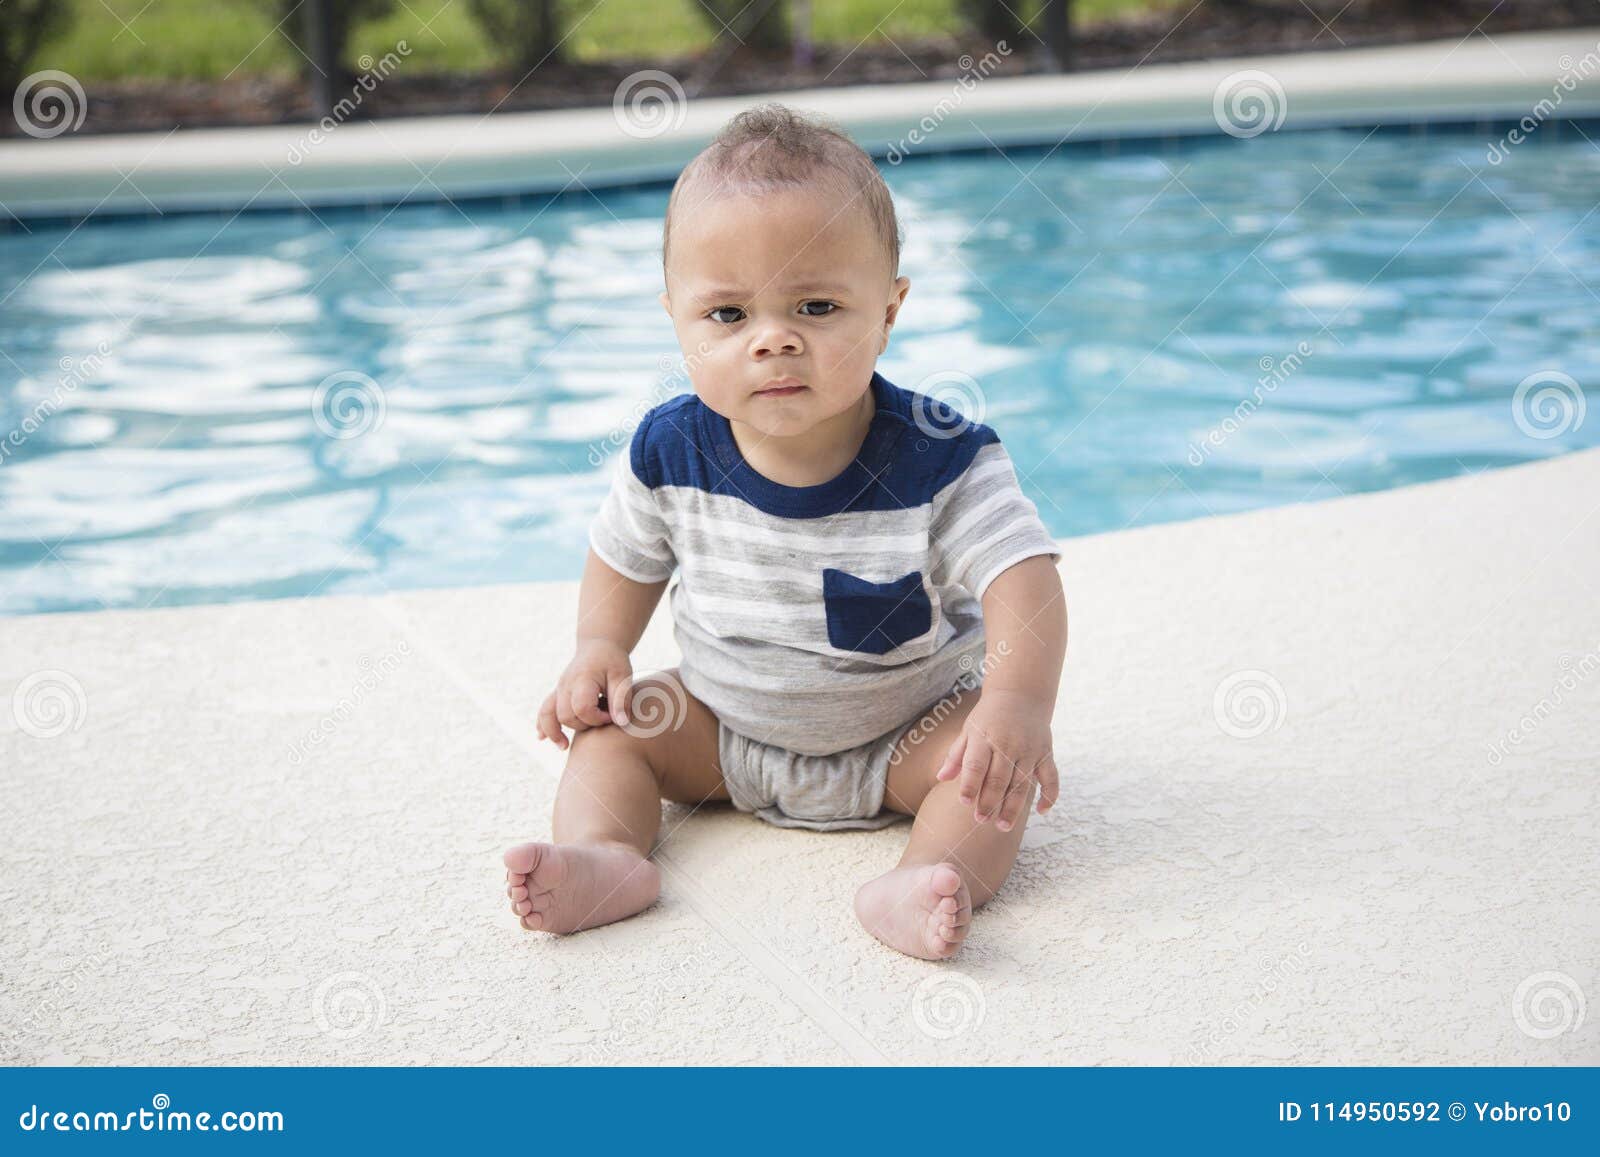 baby boy sitting dangerously on the edge of a swimming pool